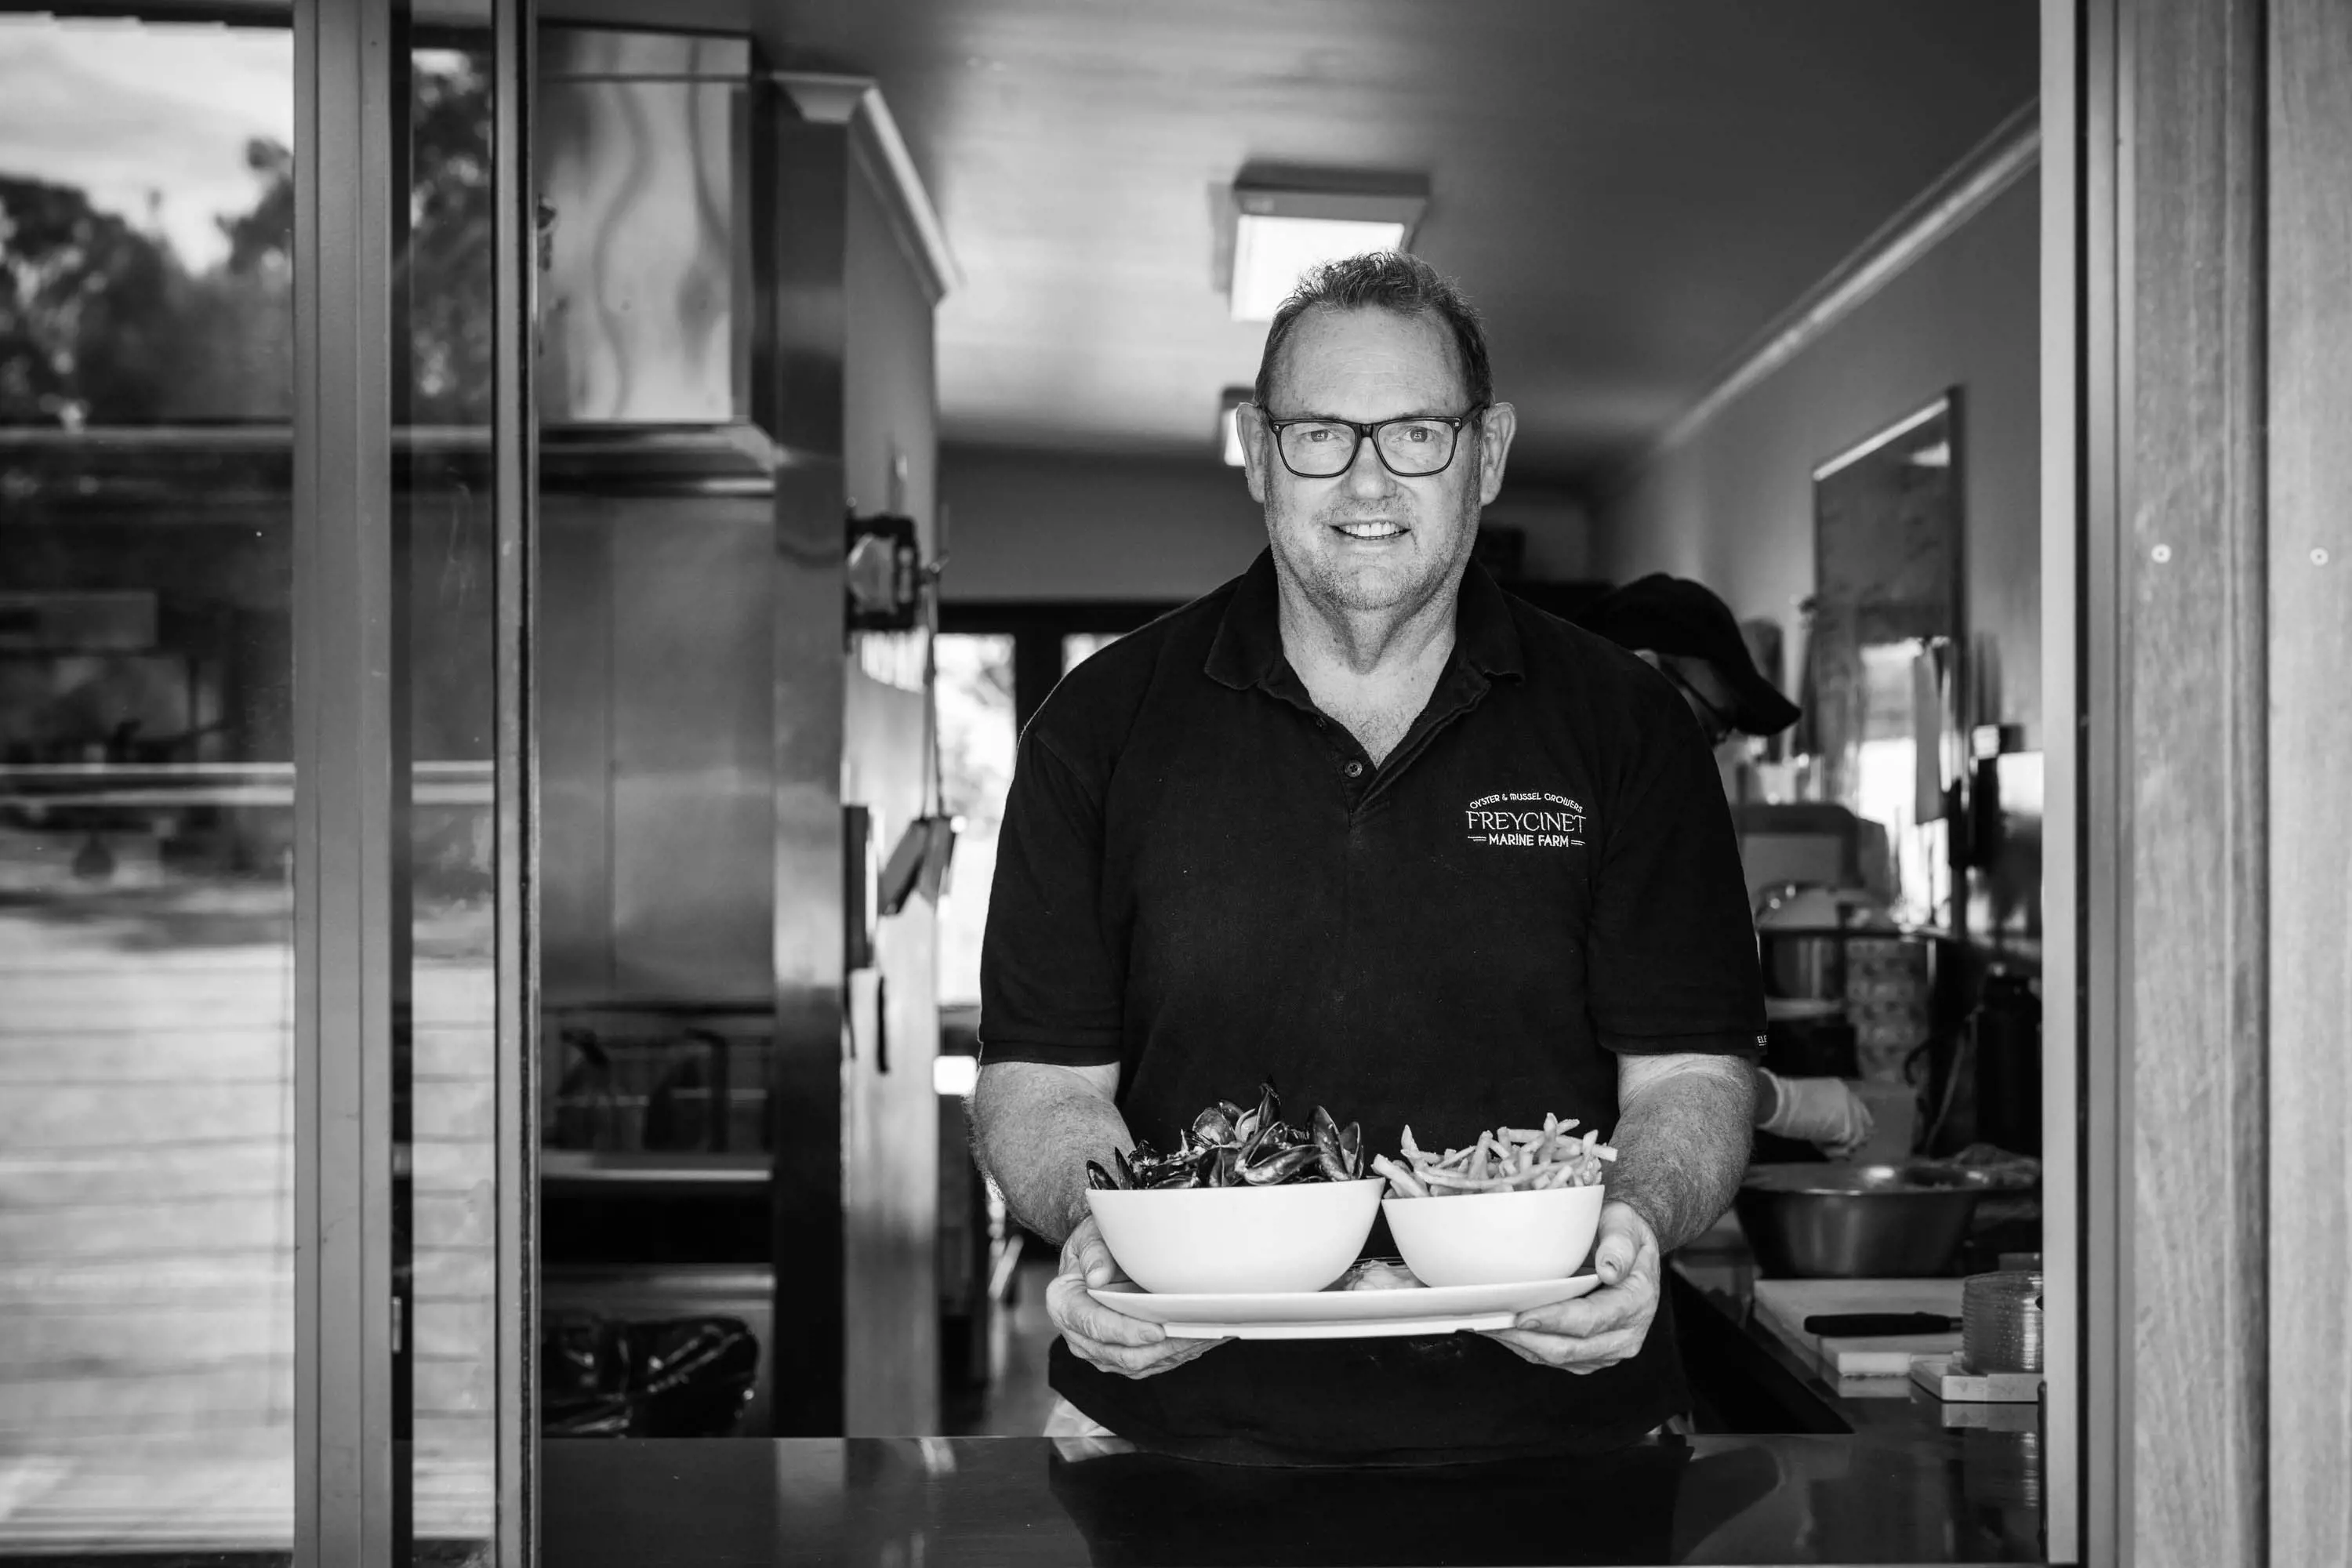 A man wearing glasses and a polo shirt stands in a doorway holding freshly prepared mussels and fried chips.